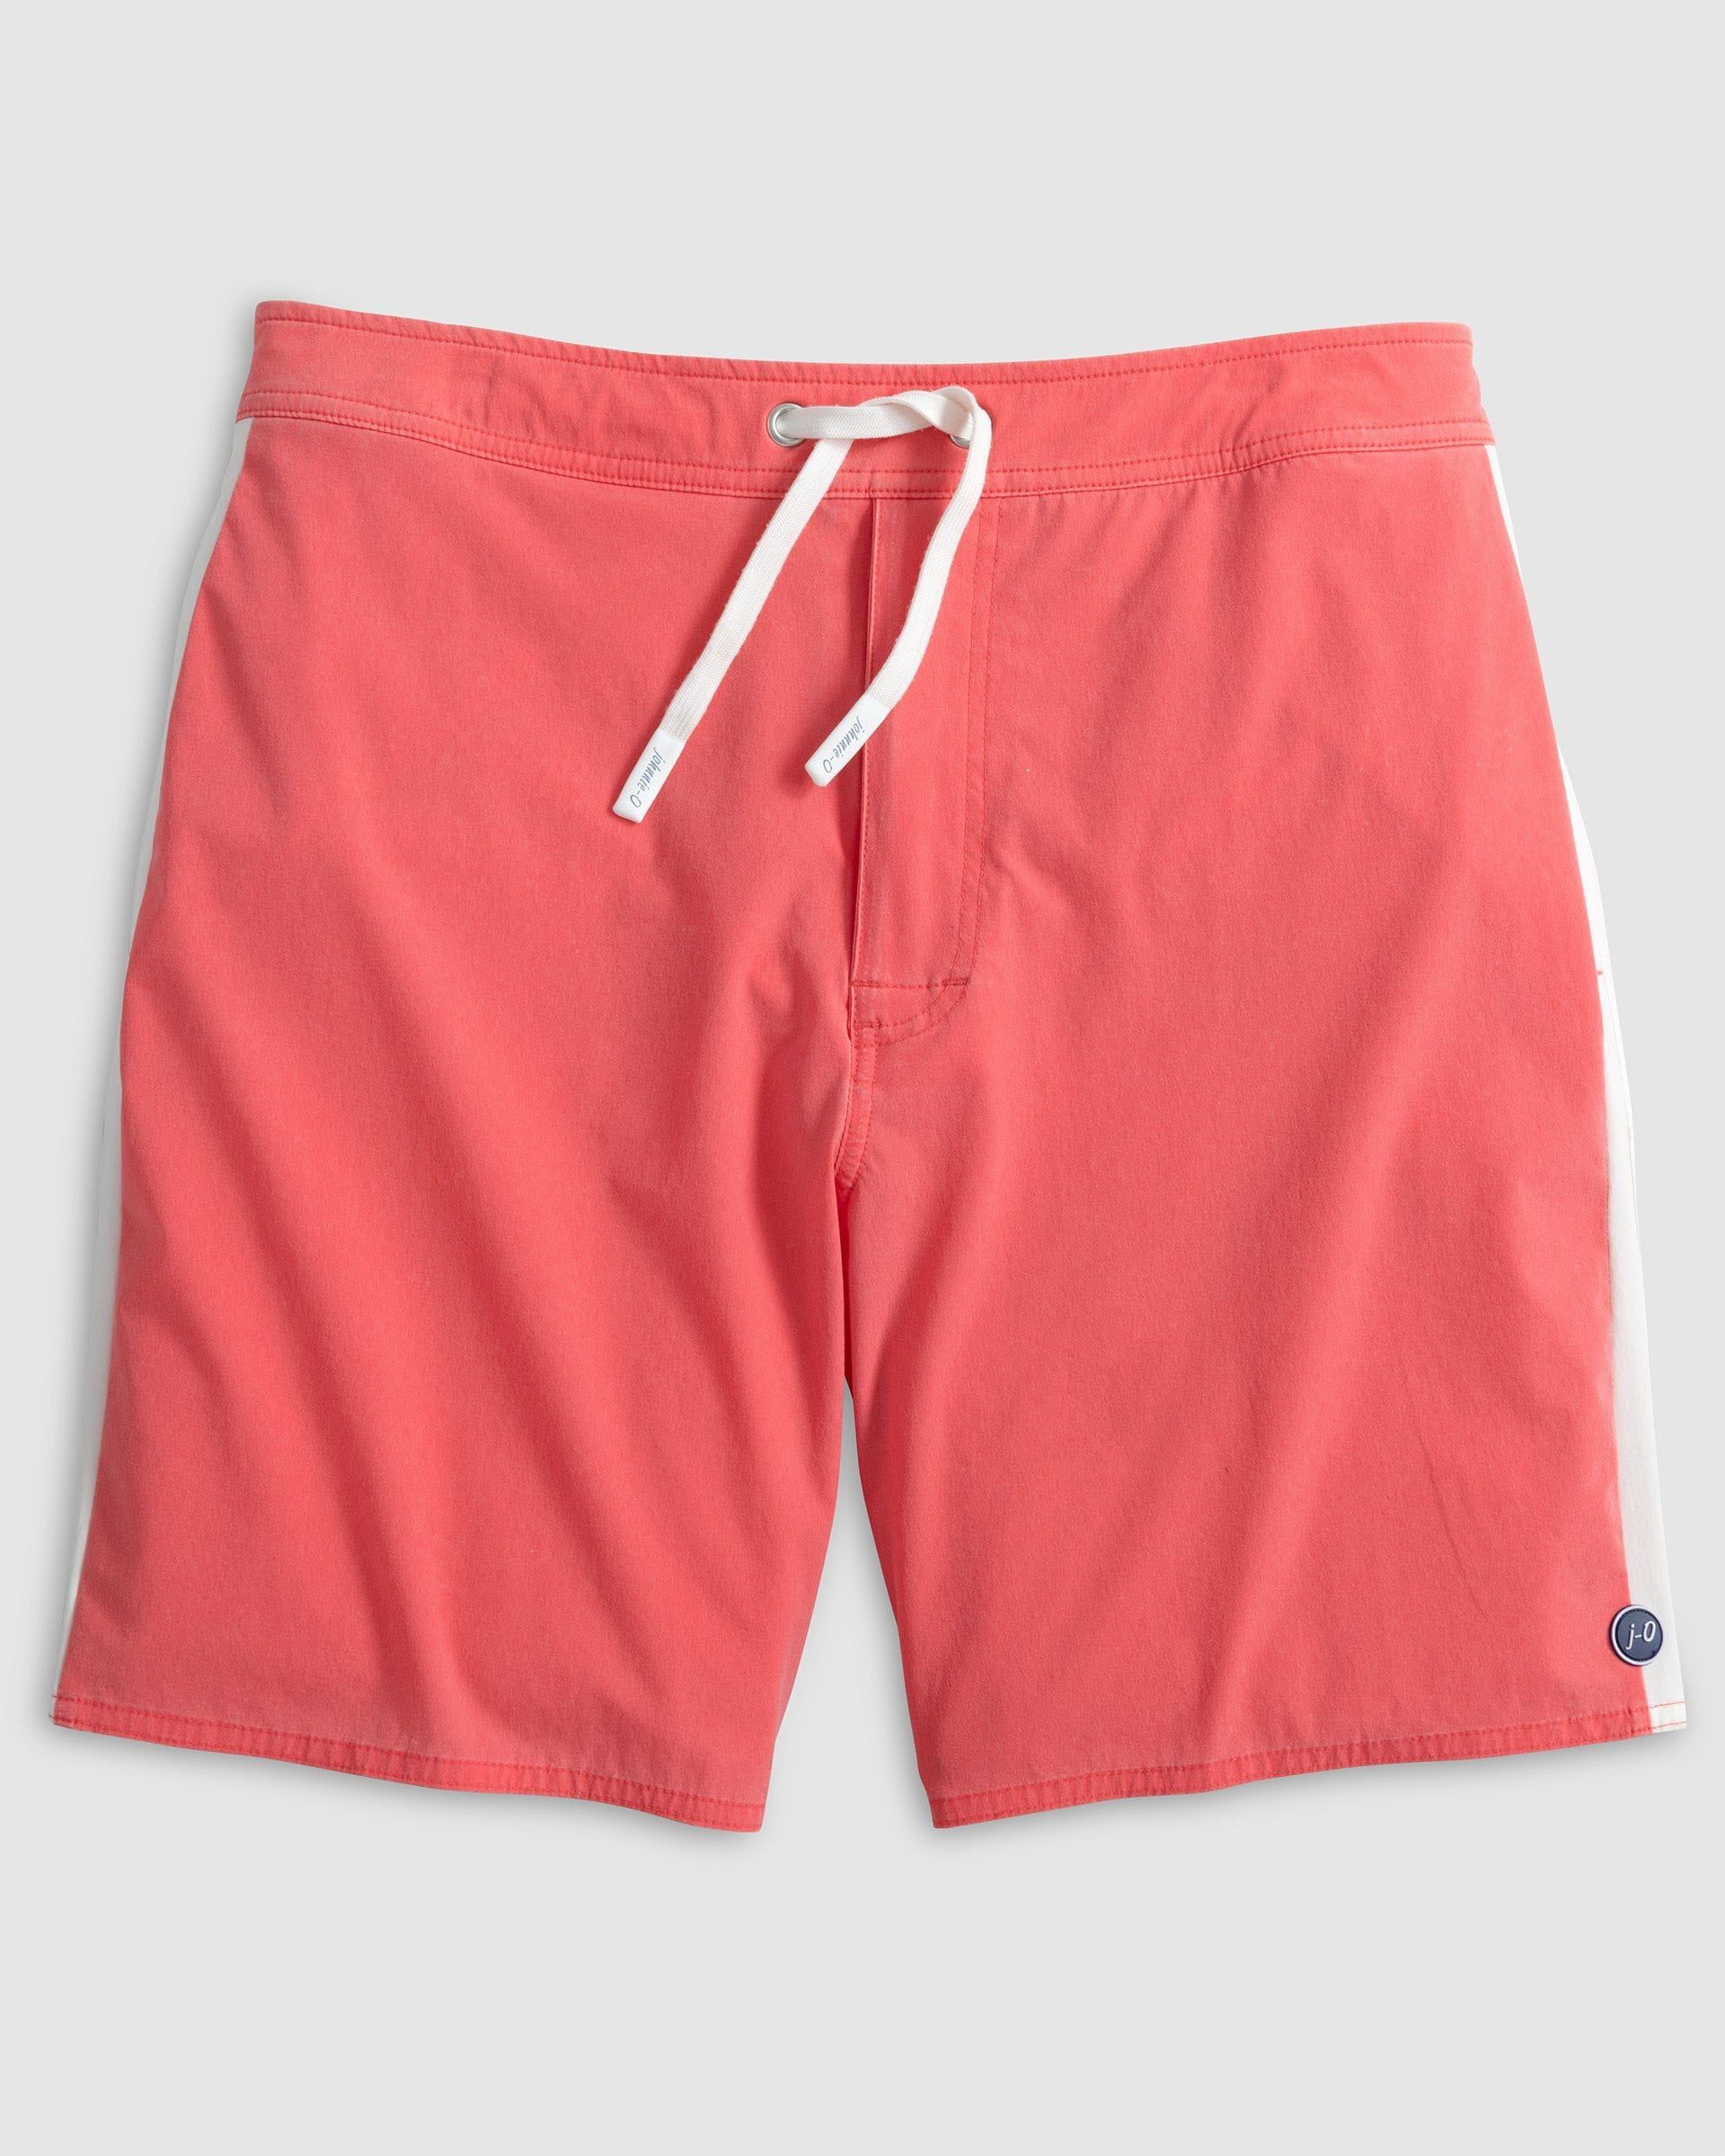 Flemming Vintage Style 7" Surf Shorts | johnnie O